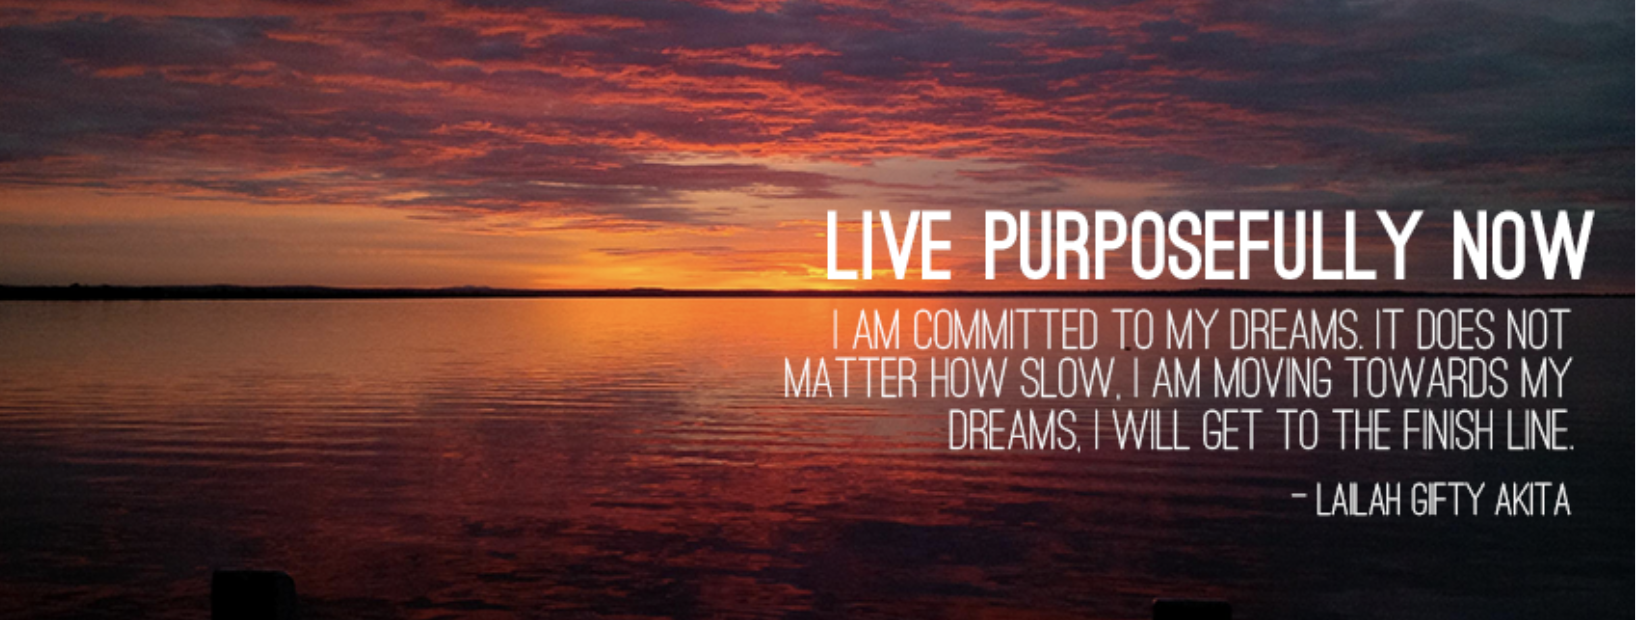 Live Purposefully Now Facebook Page Image